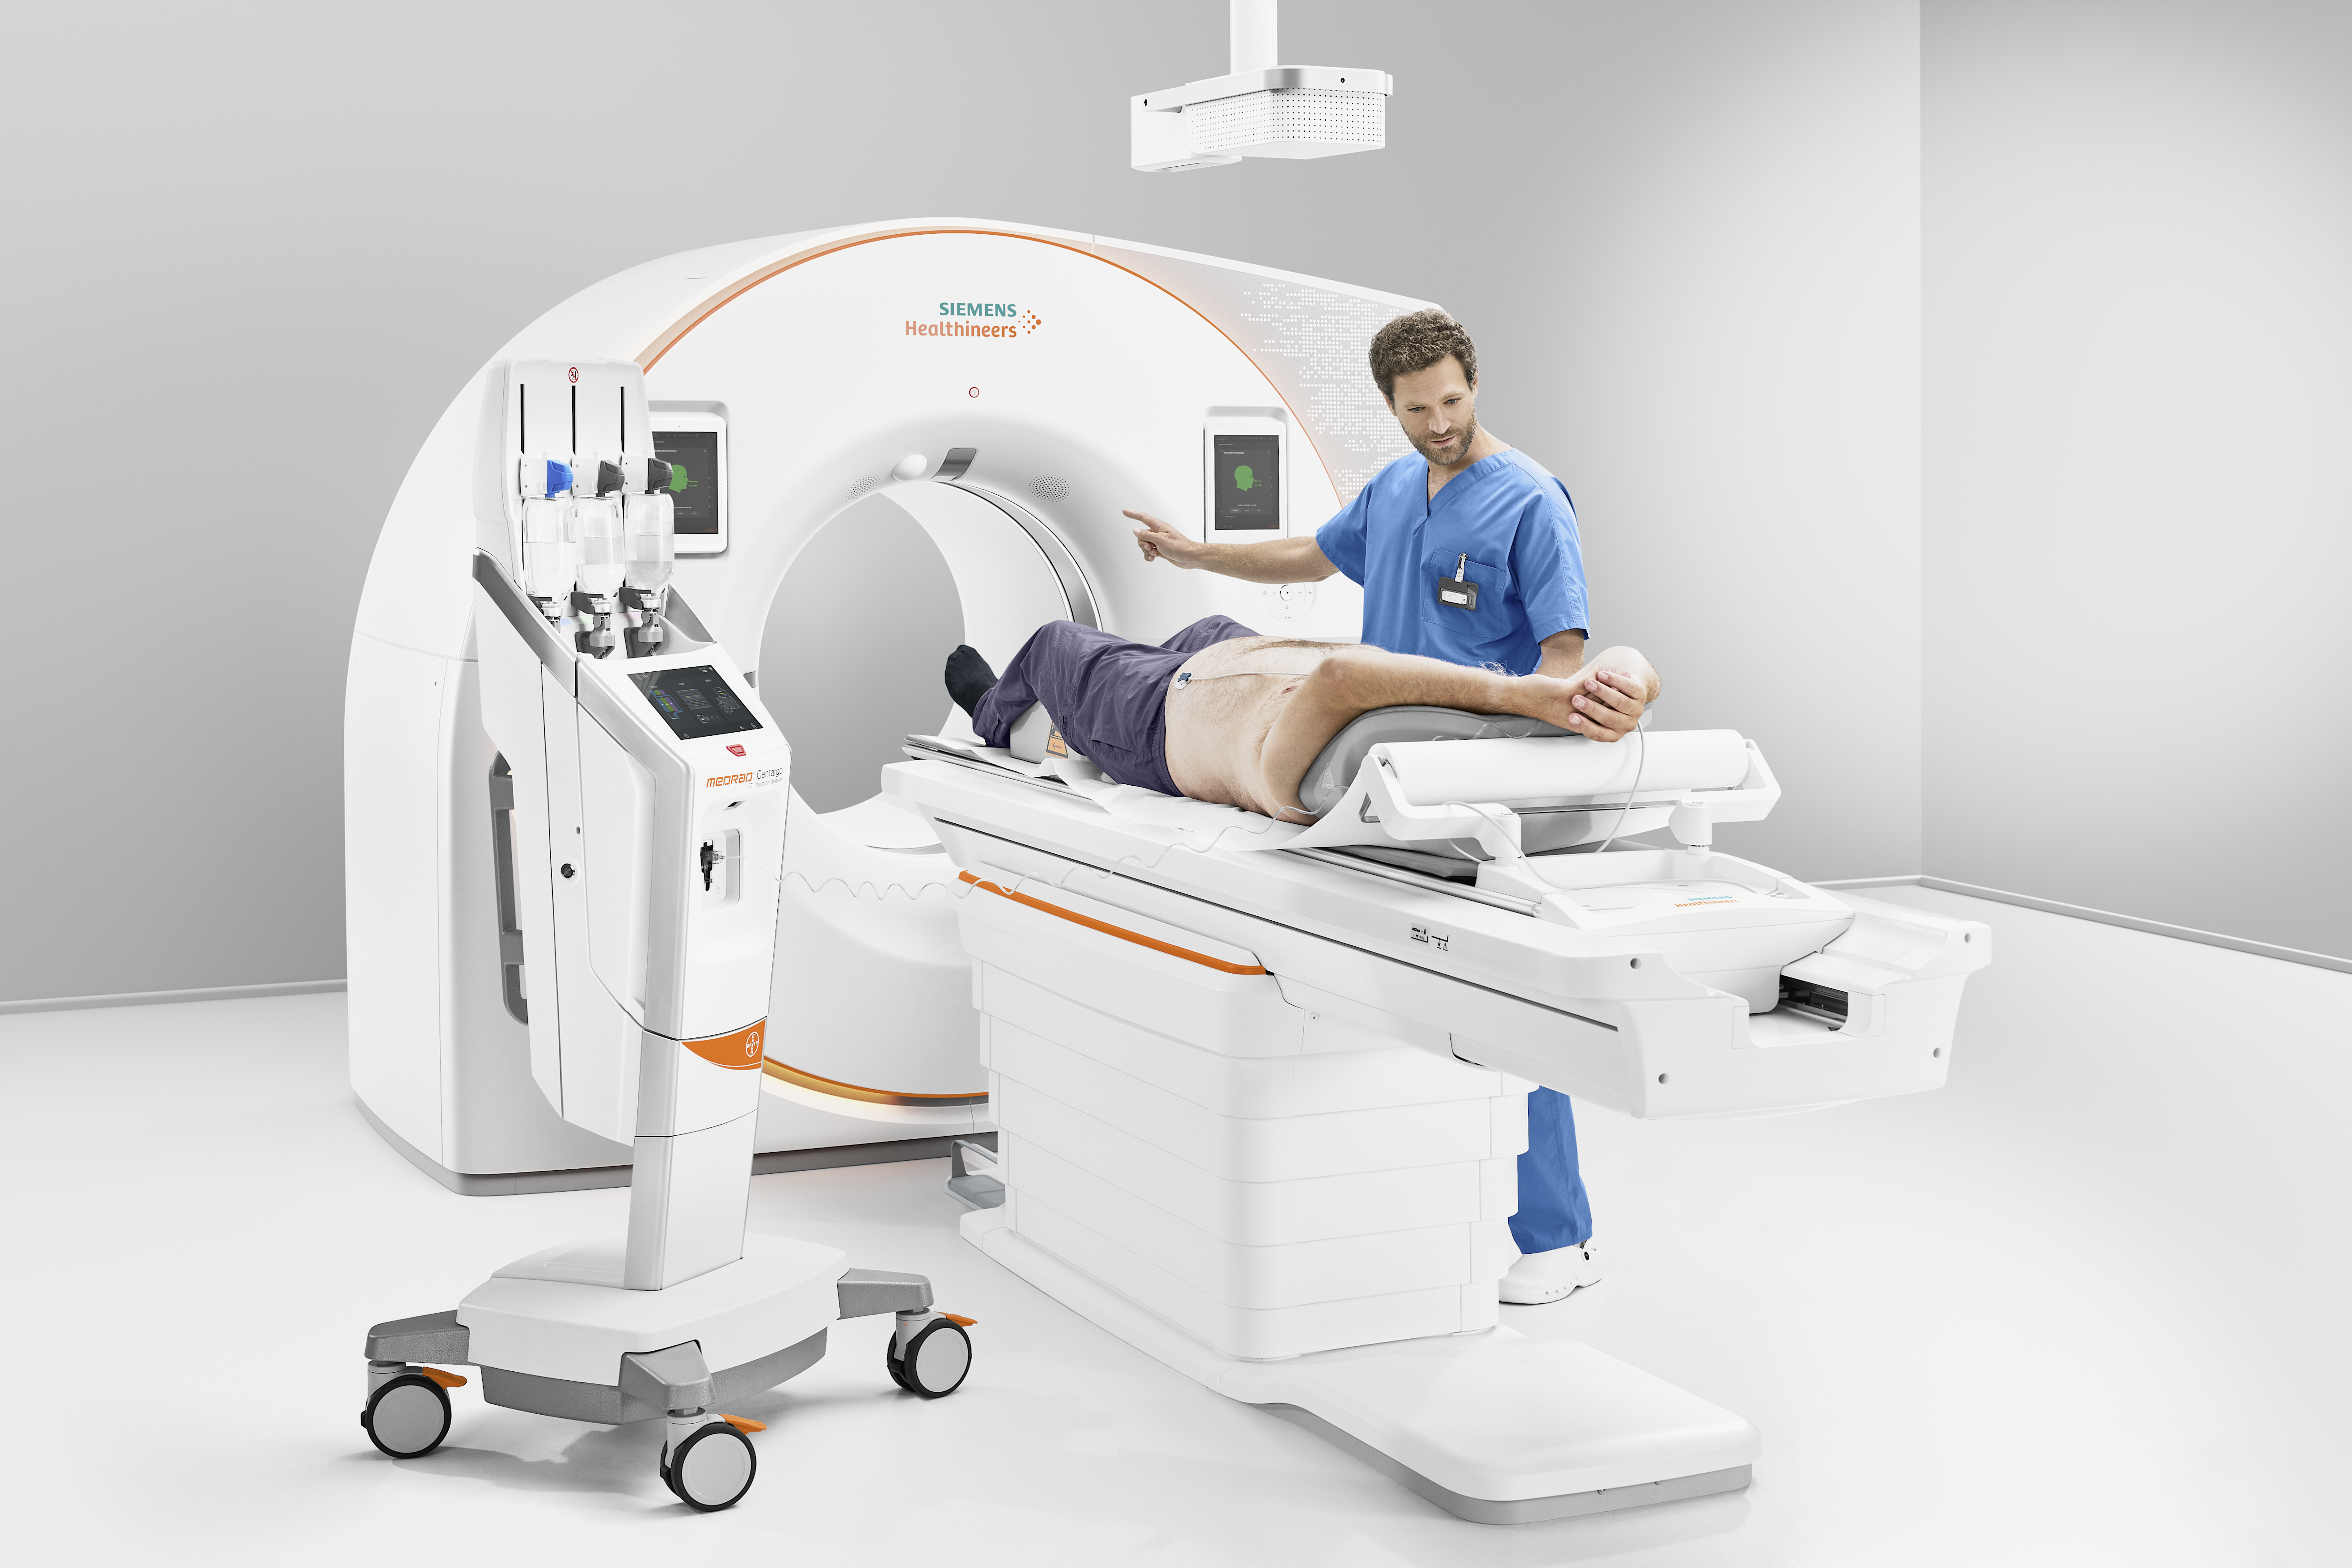 Photo of a PC-CT machine with ring tunnel containing radiation source and detector, and the examination table on which a person is lying. A doctor is explaining something to the patient.